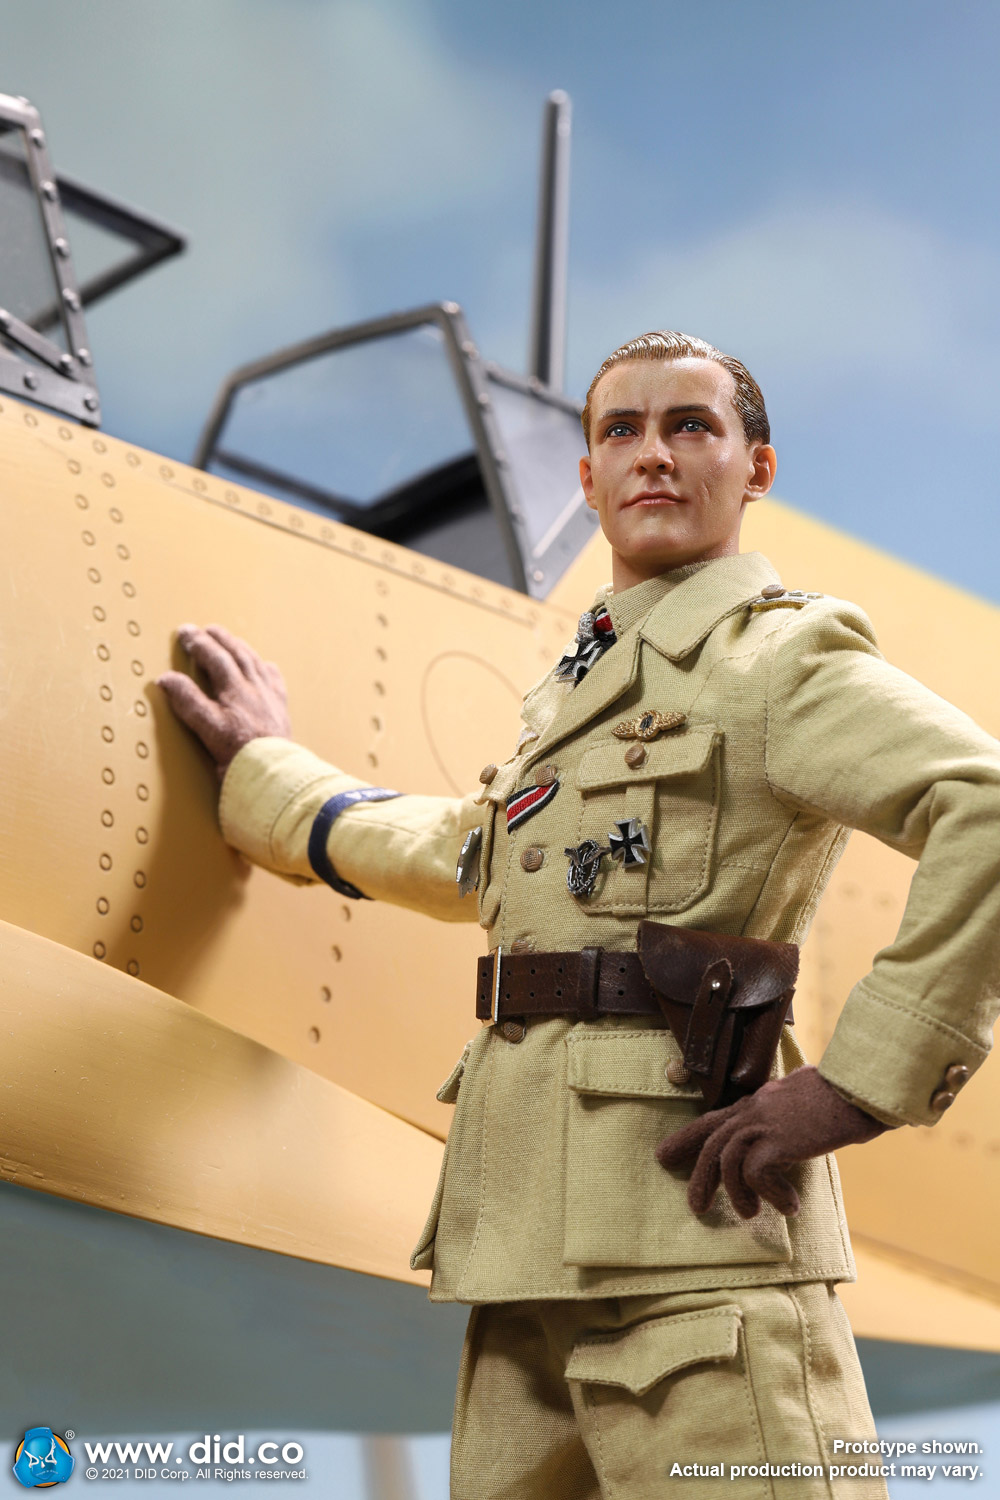 Diorama - NEW PRODUCT: D80154 WWII German Luftwaffe Flying Ace “Star Of Africa” – Hans-Joachim Marseille & E60060  Diorama Of “Star Of Africa” 15299